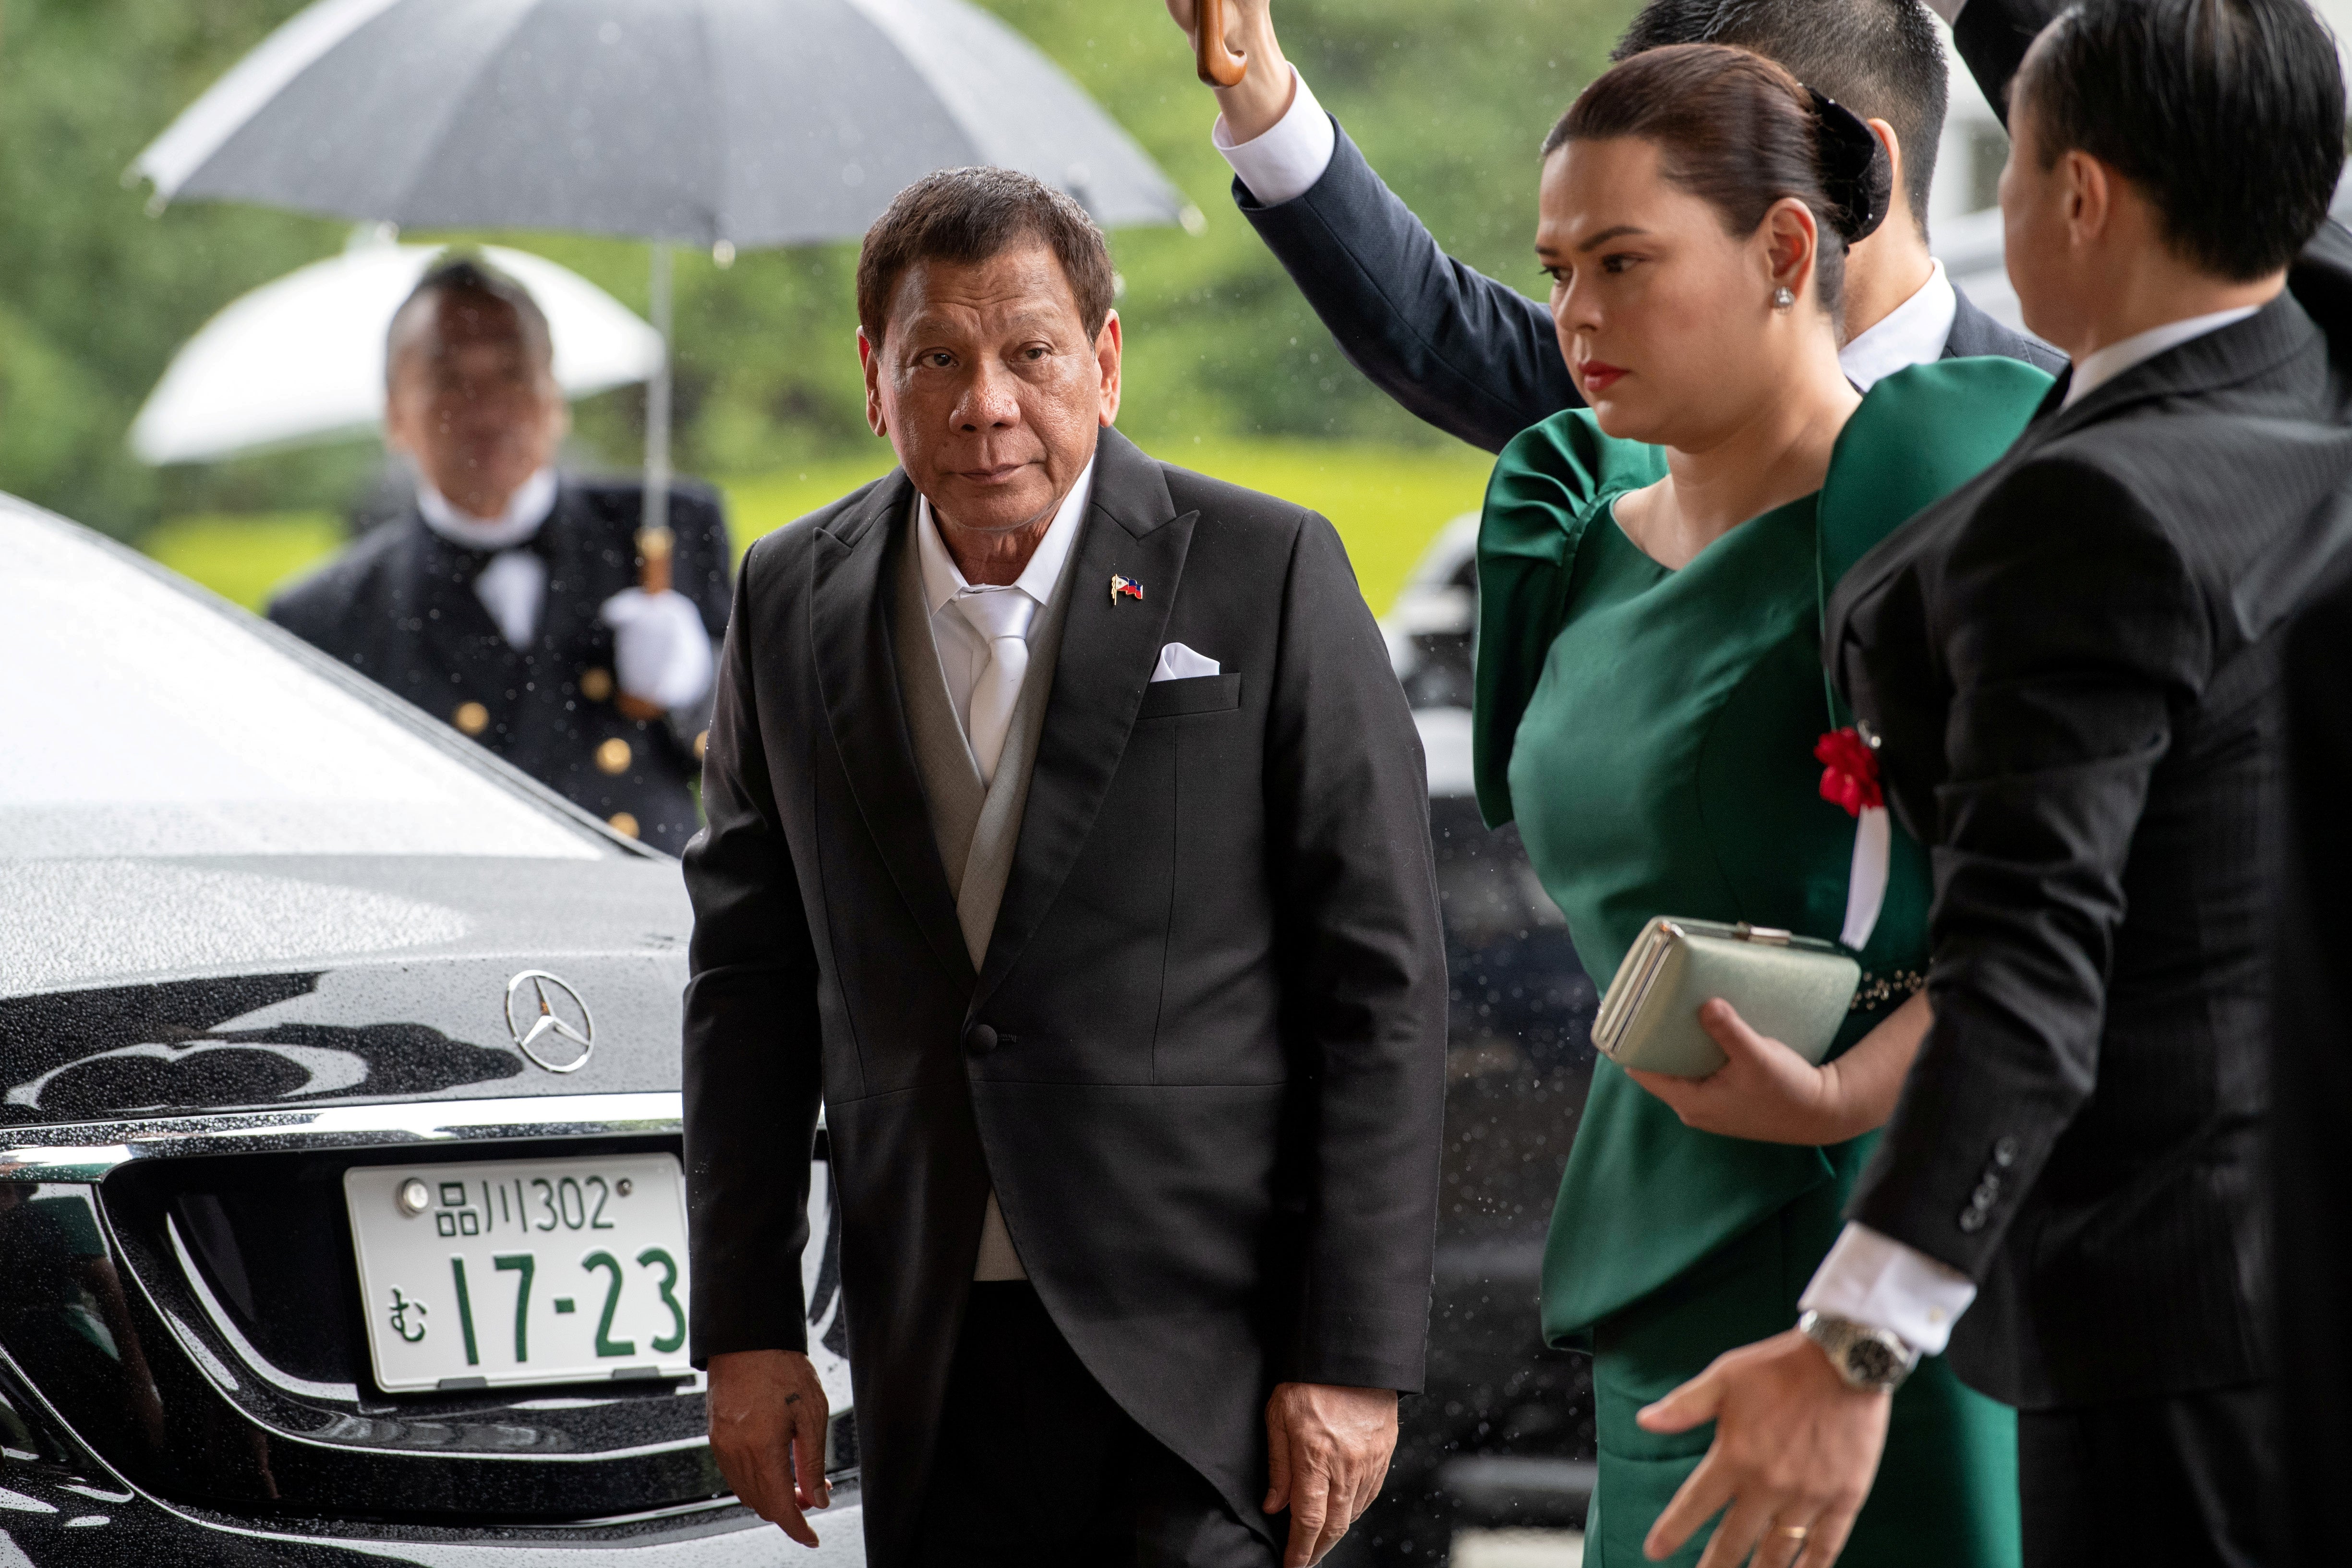 Mr Duterte is known for making remarks often deemed offensive and sexist